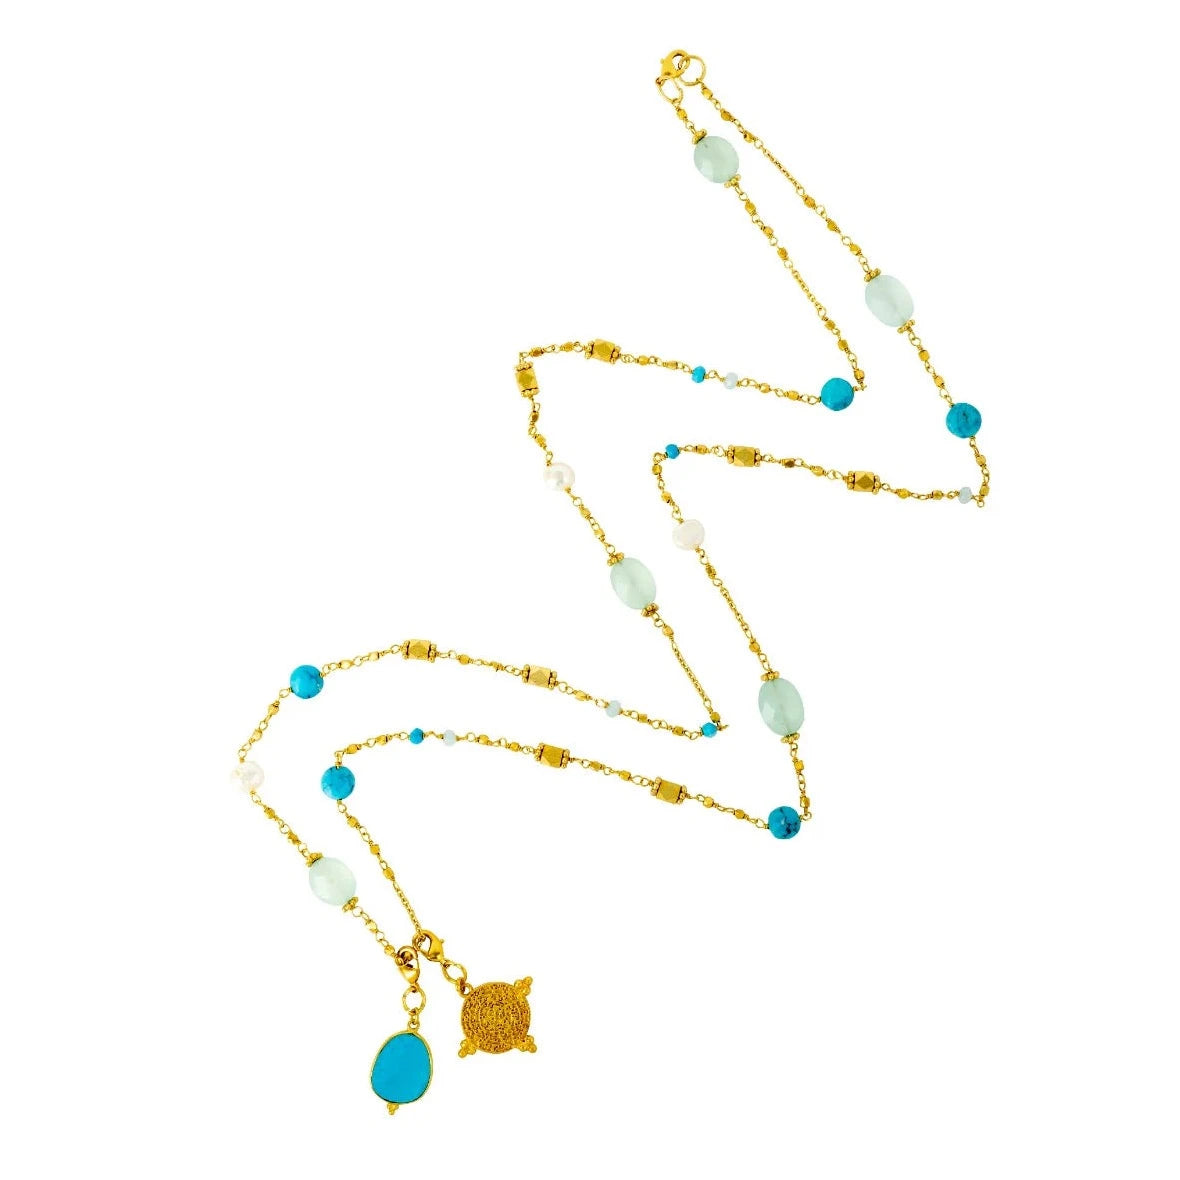 This necklace, from Mazzi D Fiori, features a variety of gemstones, including turquoise, chalcedony, agate, and freshwater pearl, strung together in a multiway design. It also includes two detachable charms - a signature gold coin and a turquoise gemstone. The necklace can be worn long or doubled up, and the charms can be rearranged to fit your desired style. It is a beautiful and versatile piece to add to any jewelry collection.